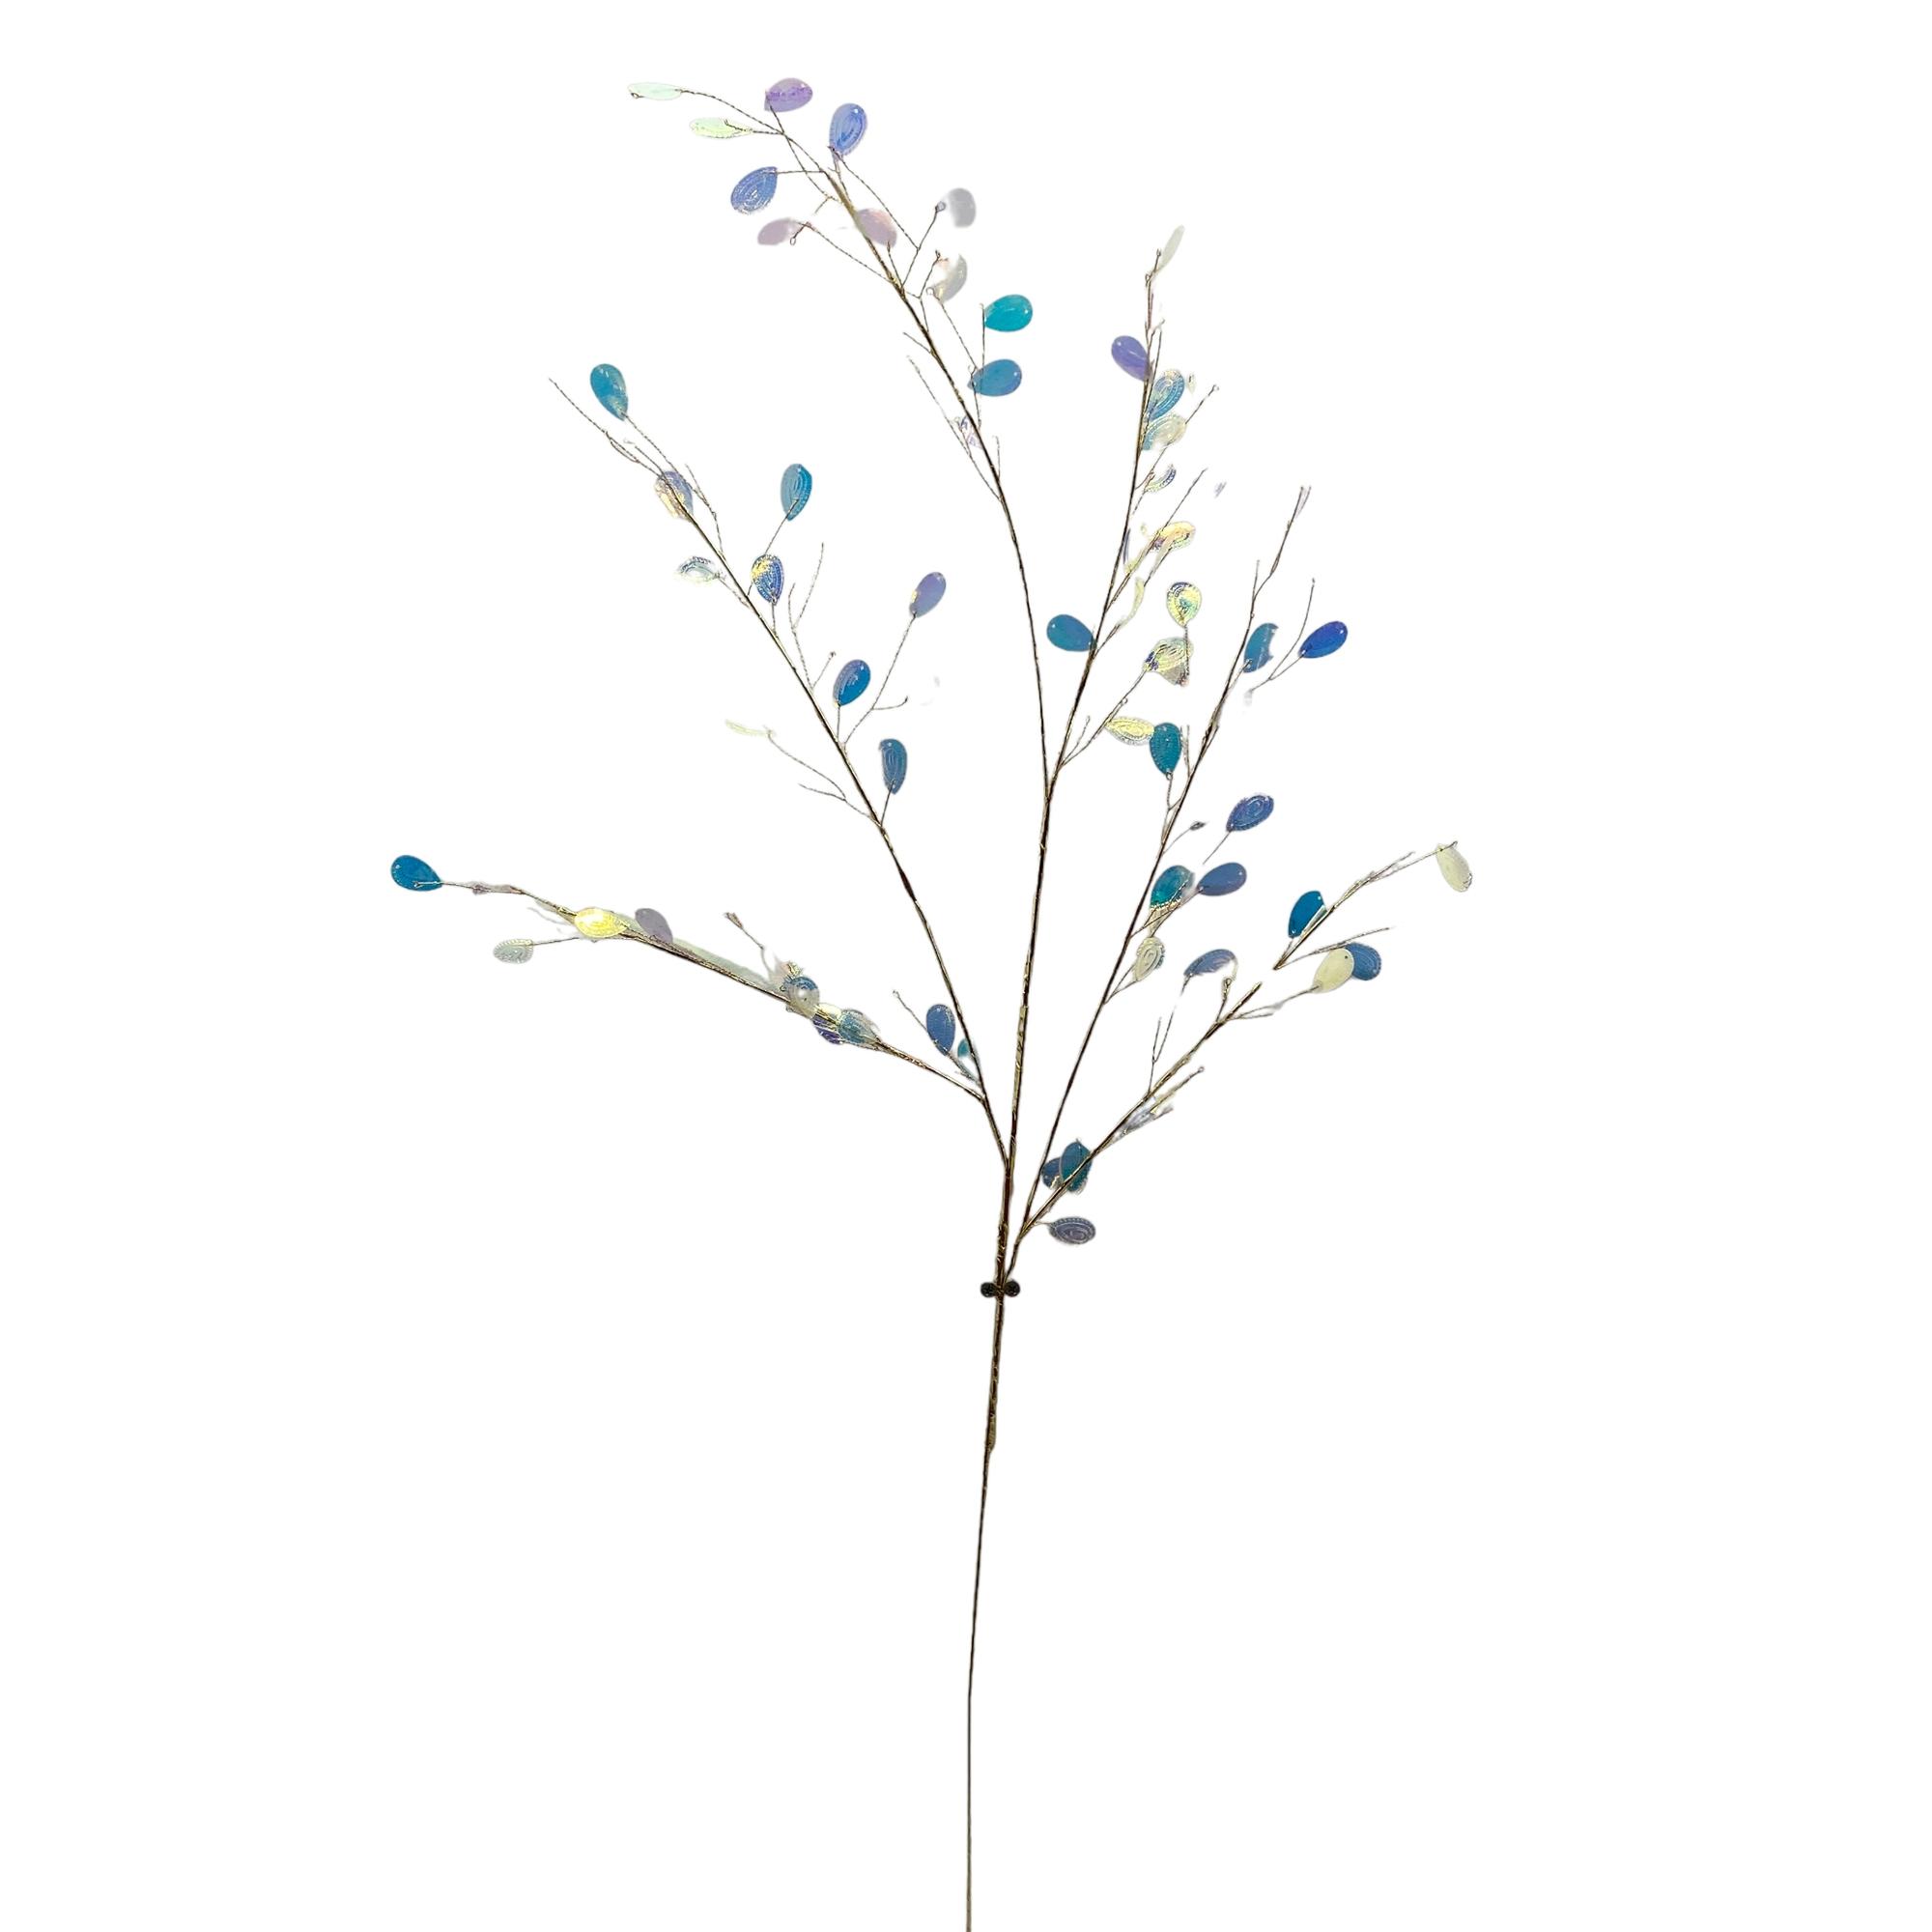 PLASTIC BEAD AND LEAVES BRANCH - 140-4700252